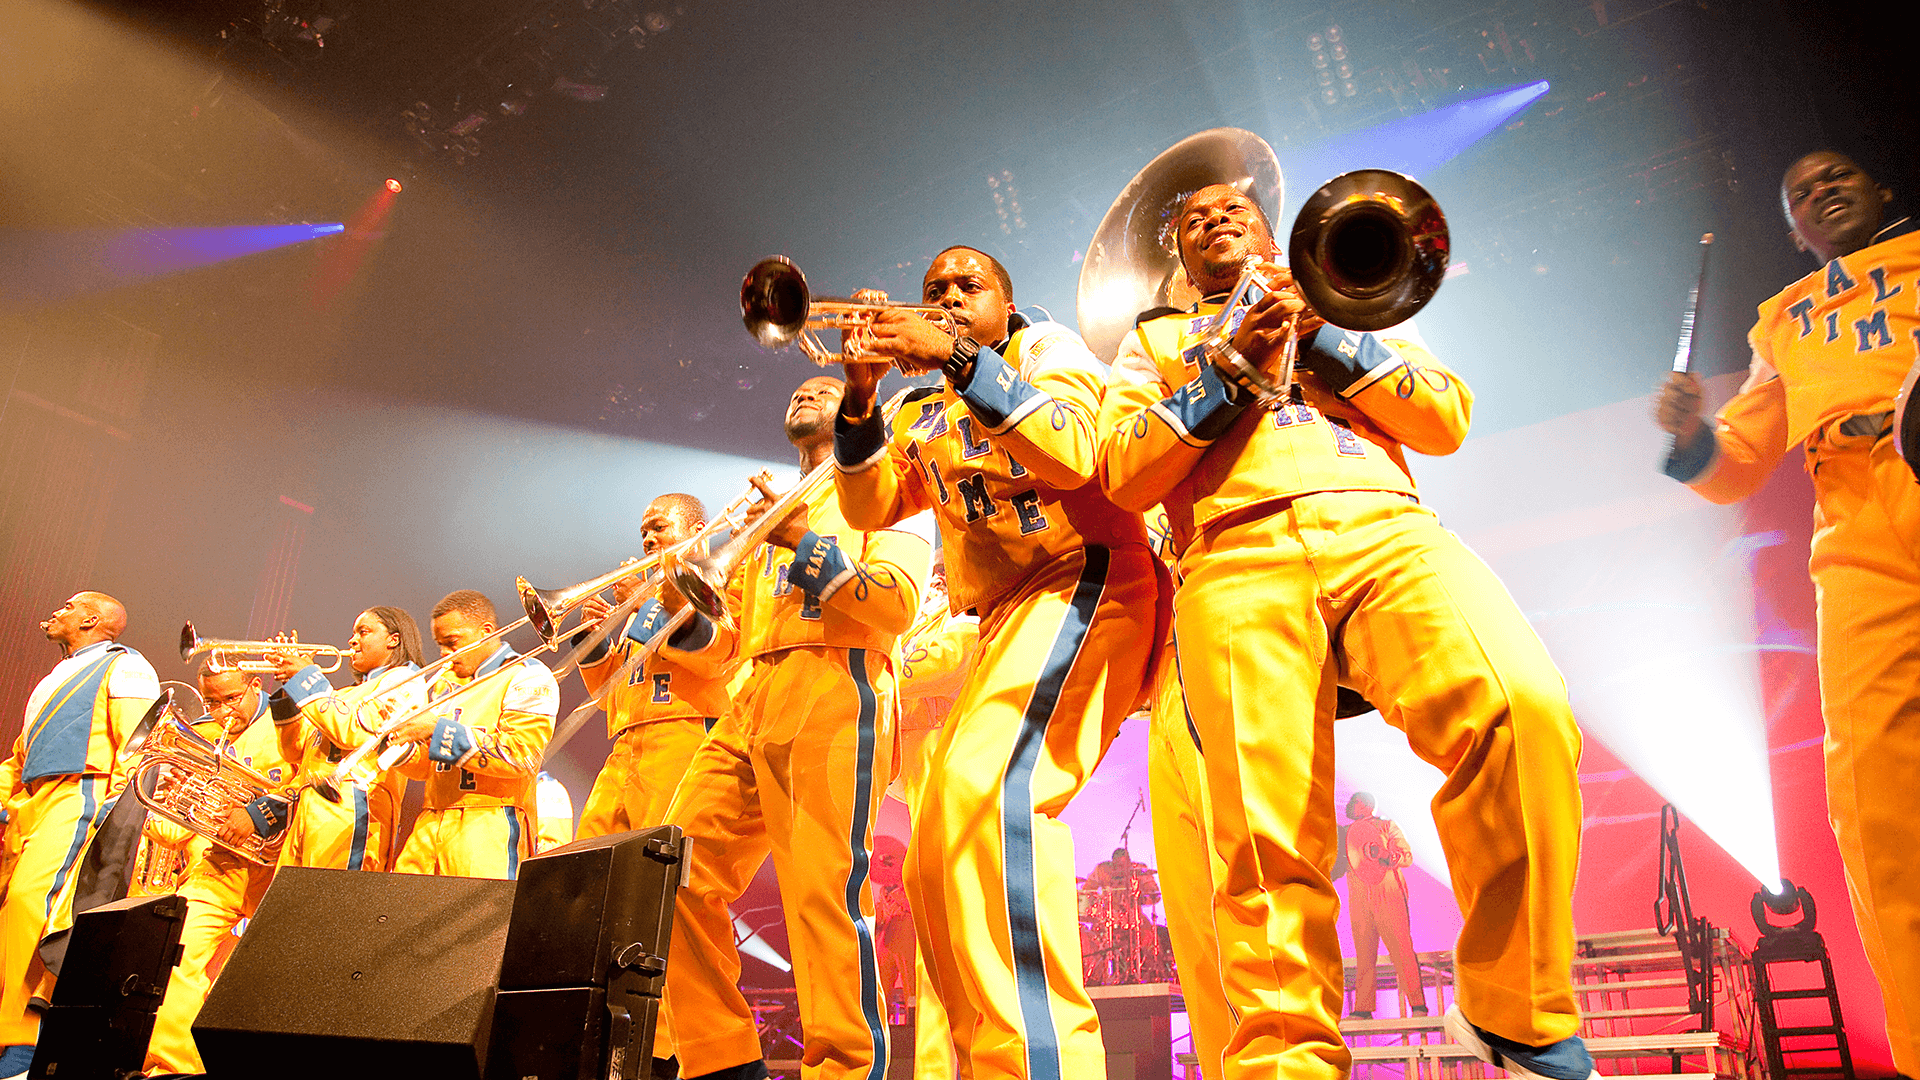 People in yellow drumline suits stand with various brass instruments on stage